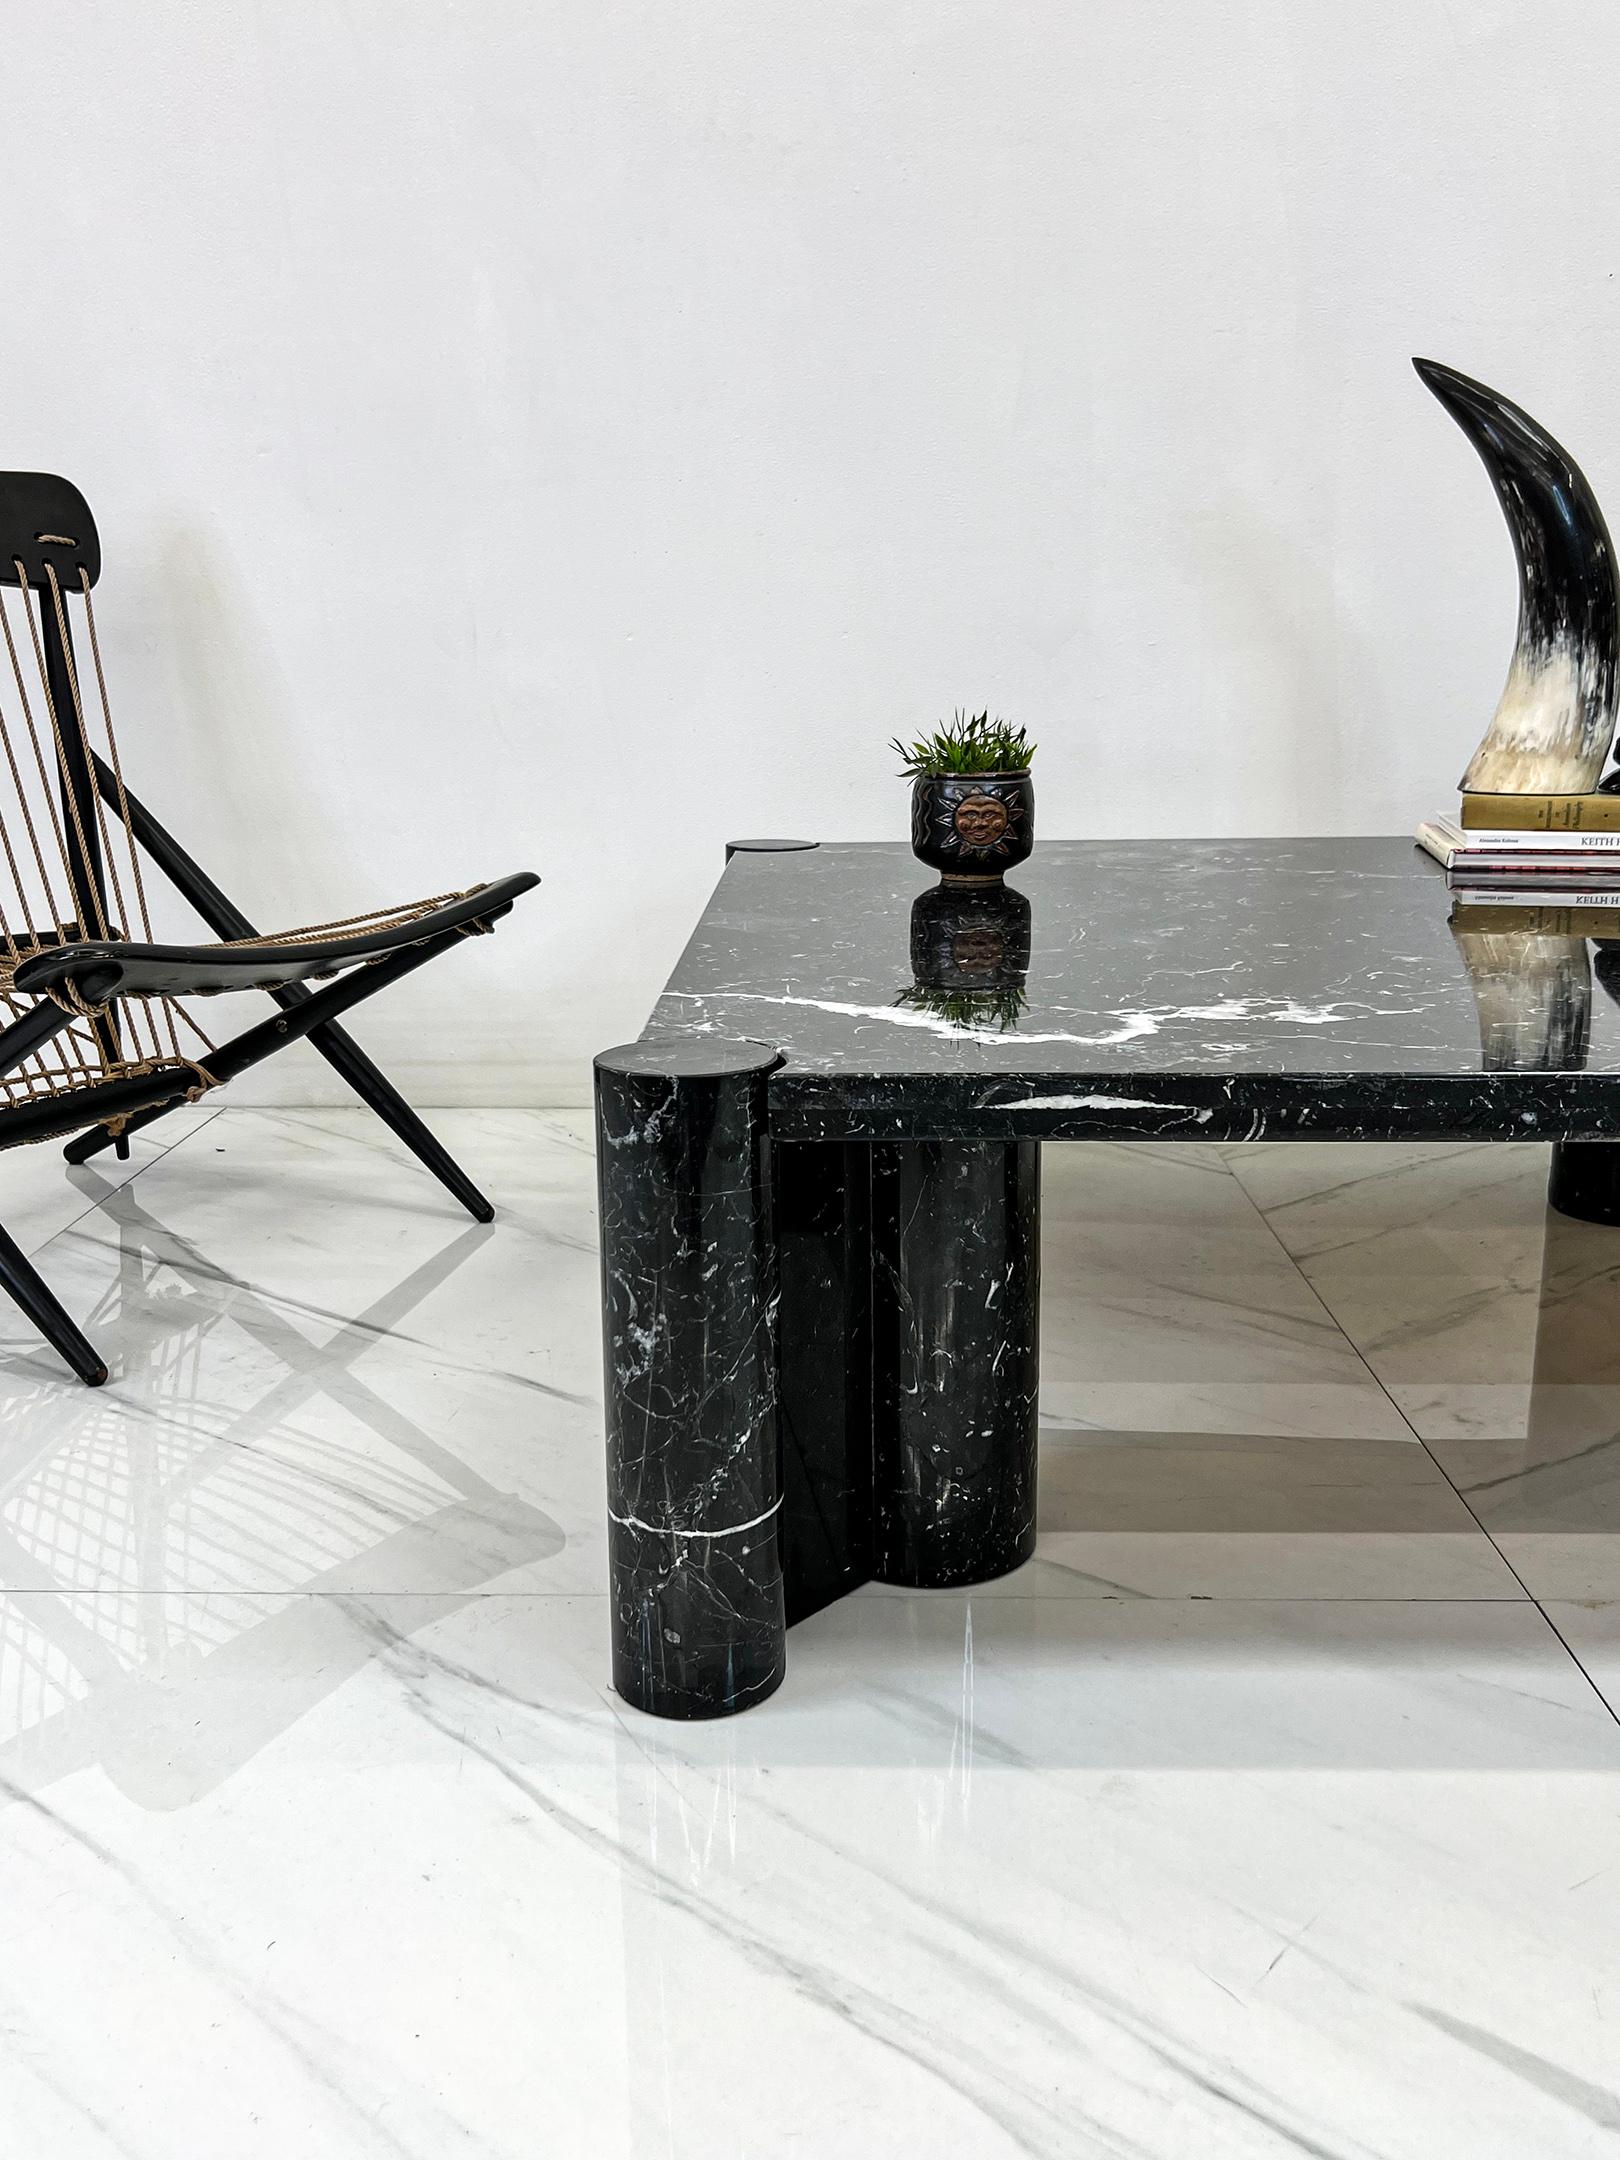 Gae Aulenti Jumbo Coffee Table for Knoll in Nero Marquina Marble For Sale 3